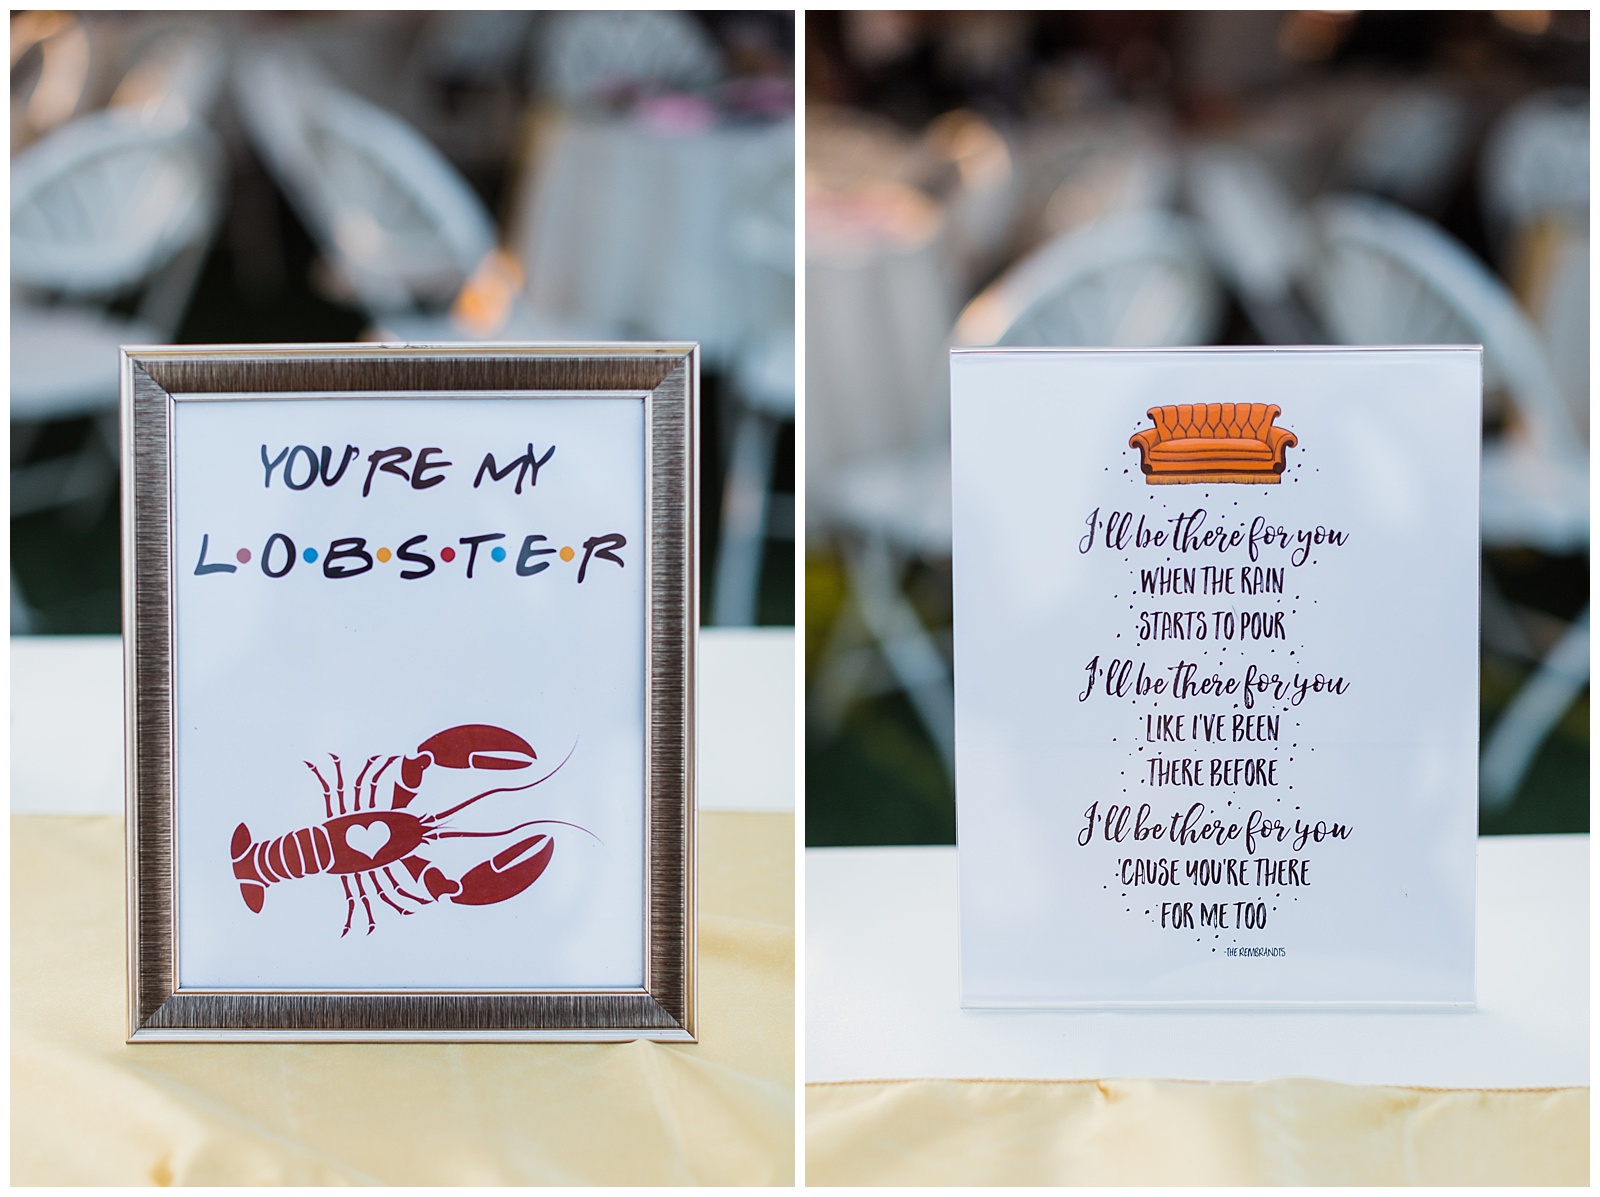 Fun signs to decorate a friends themed wedding.